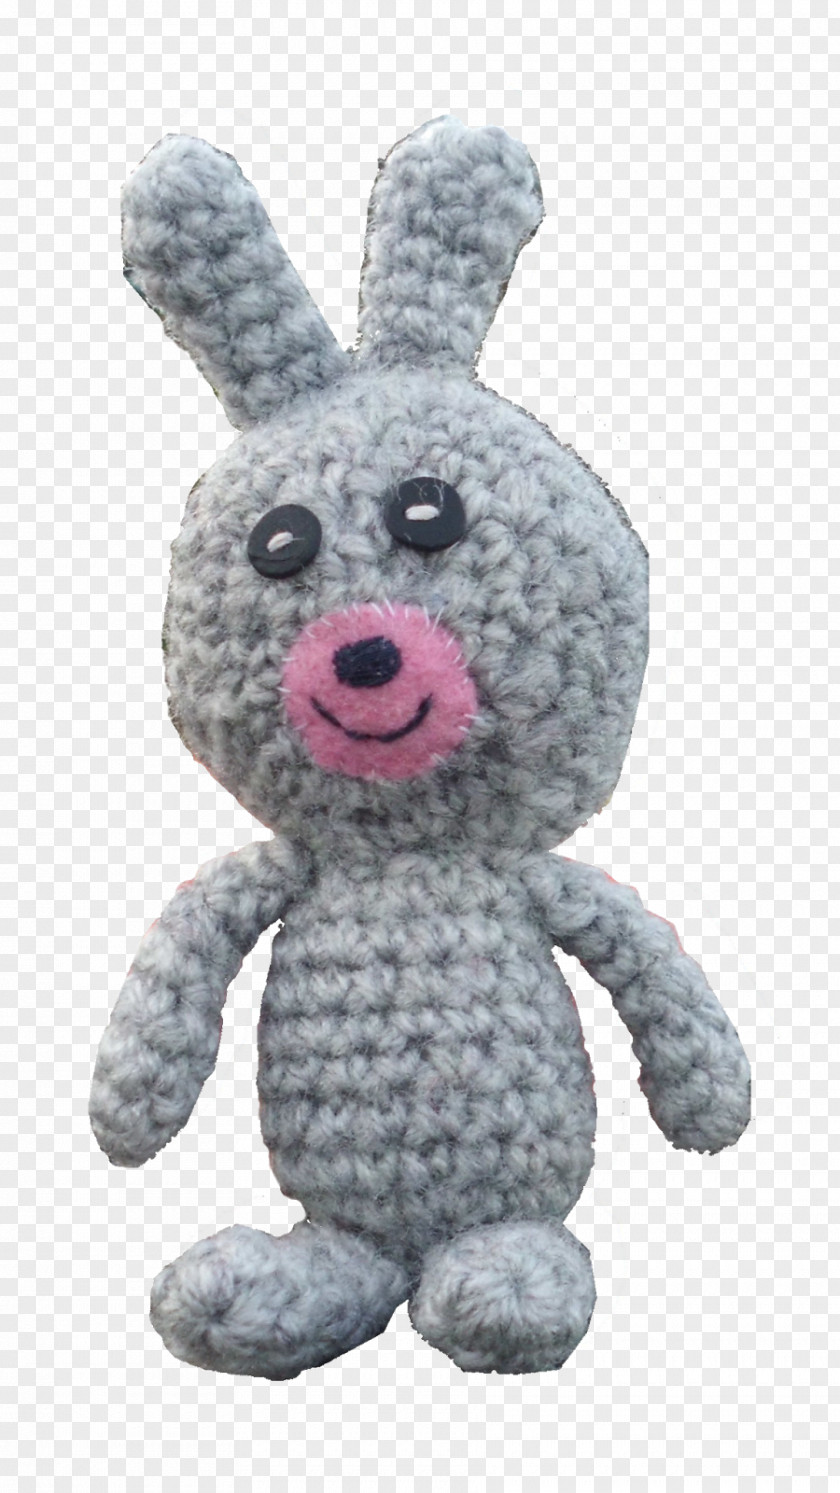 Rabbit Easter Bunny Stuffed Animals & Cuddly Toys PNG